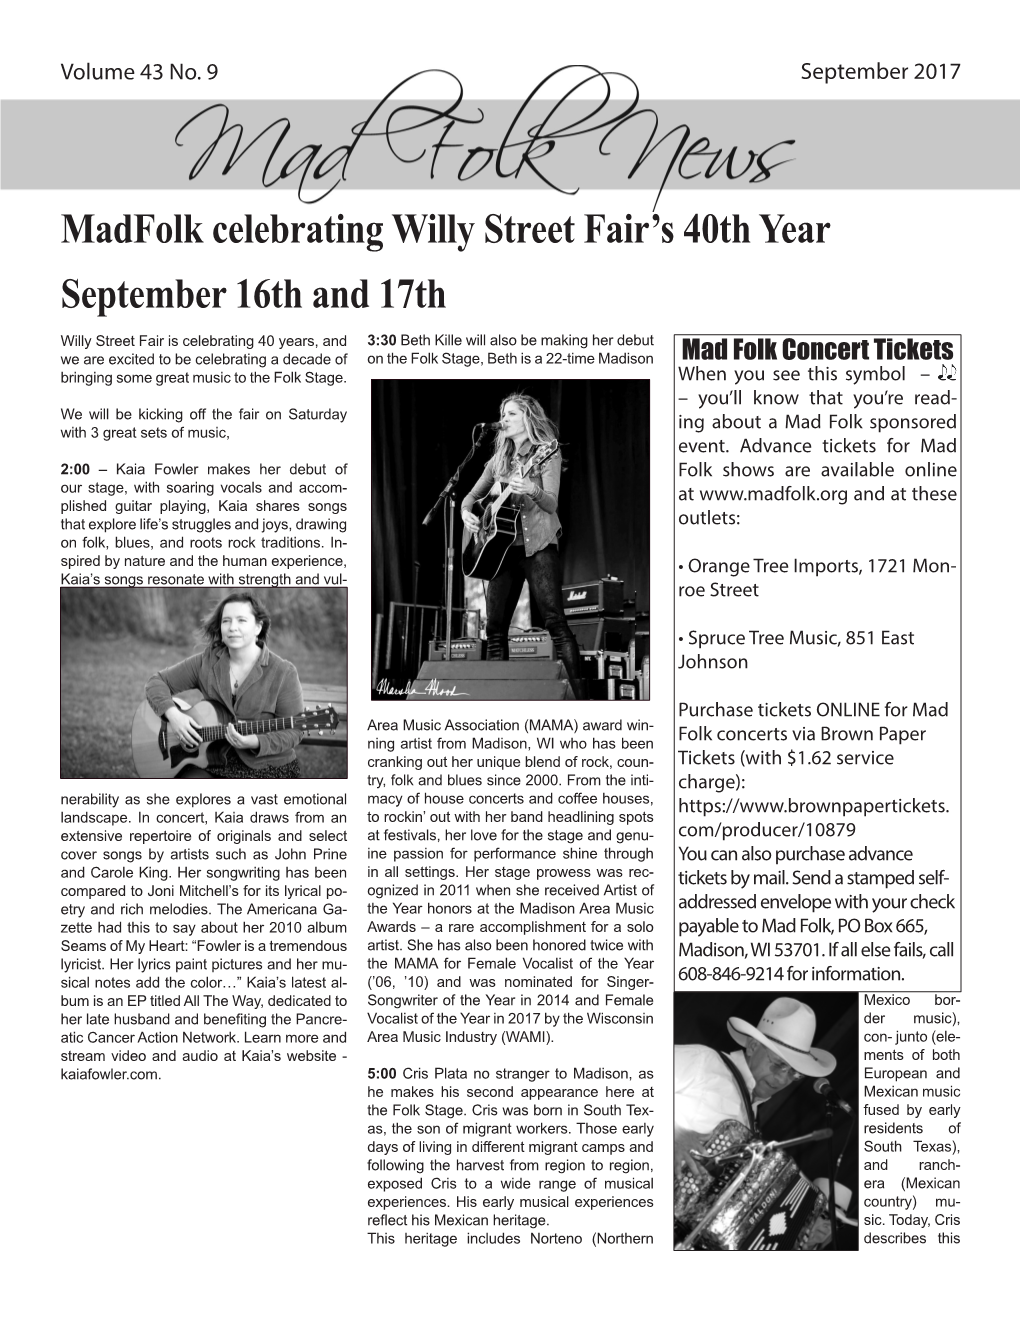 Madfolk Celebrating Willy Street Fair's 40Th Year September 16Th and 17Th